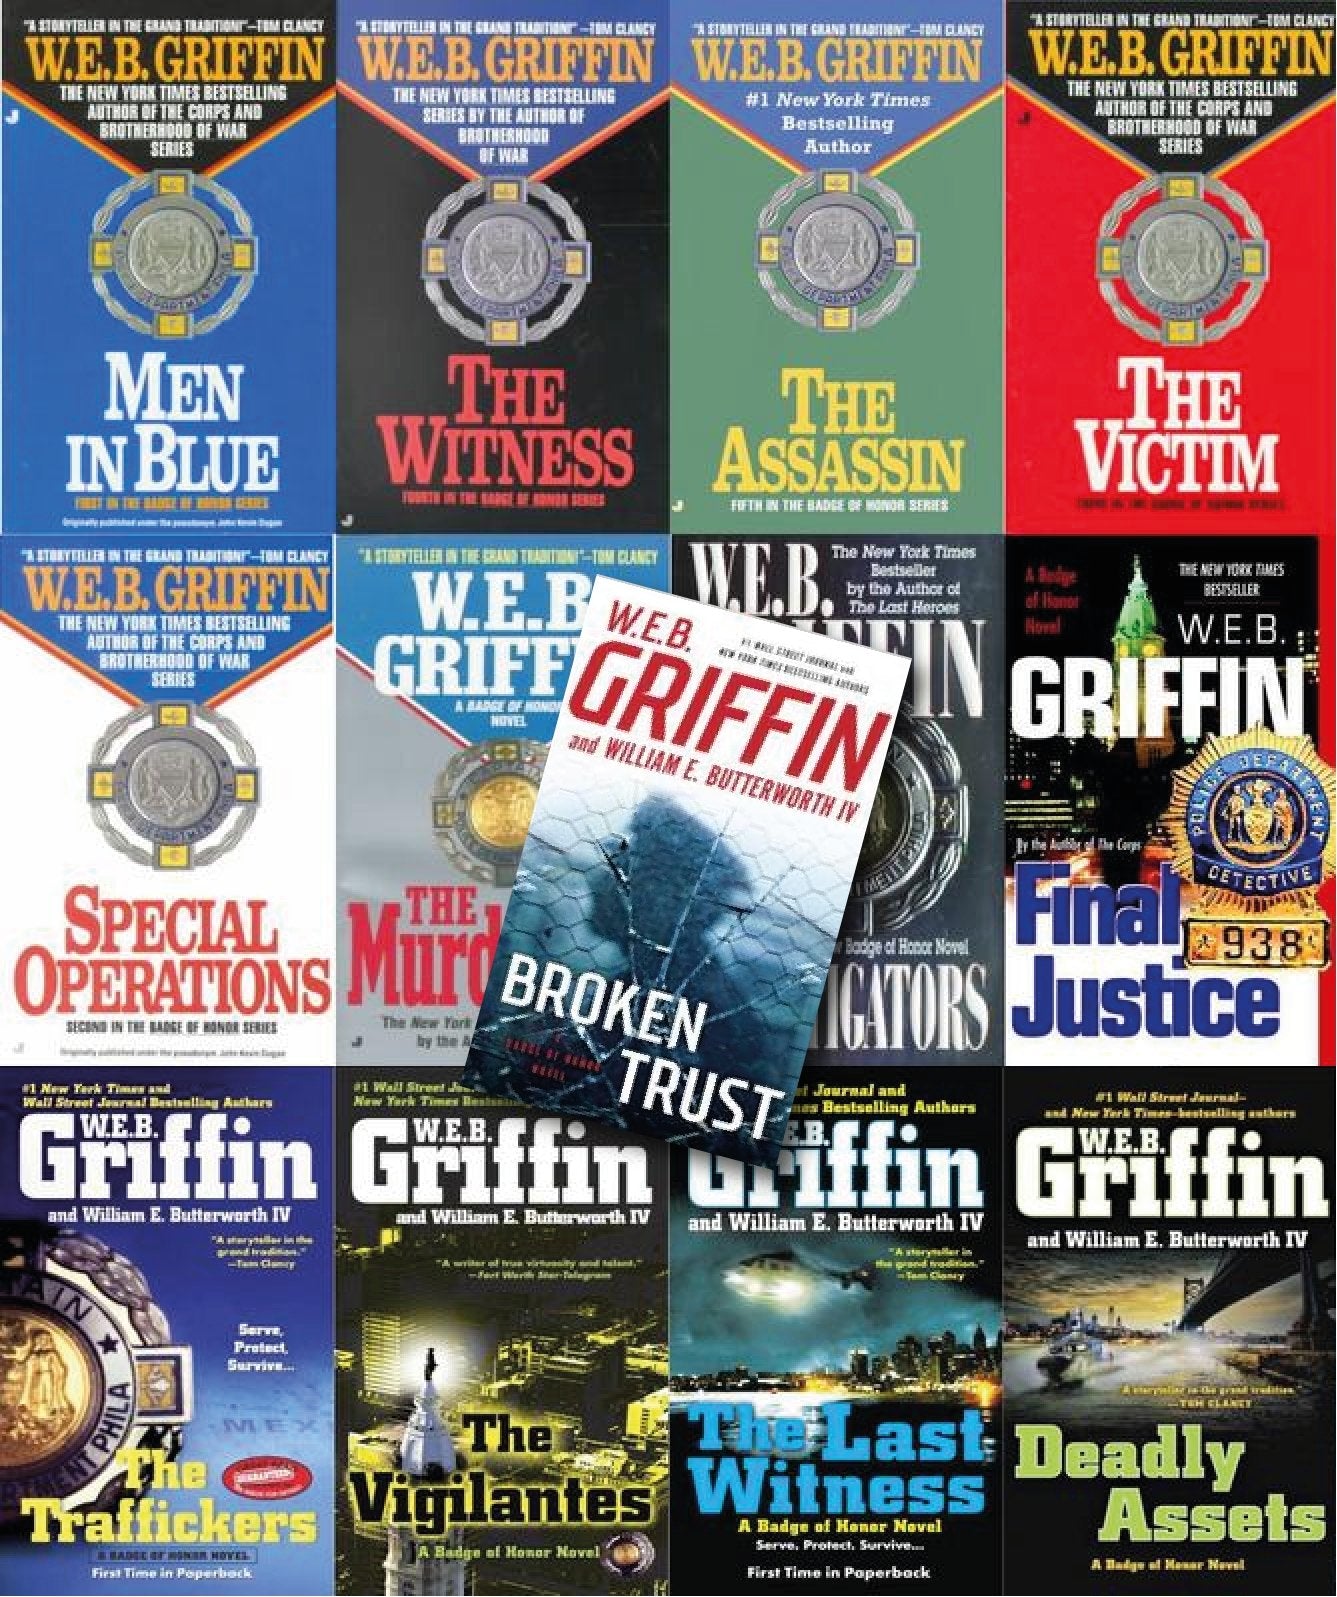 The Badge Of Honor Series by W.E.B. Griffin 13 MP3 AUDIOBOOK COLLECTION